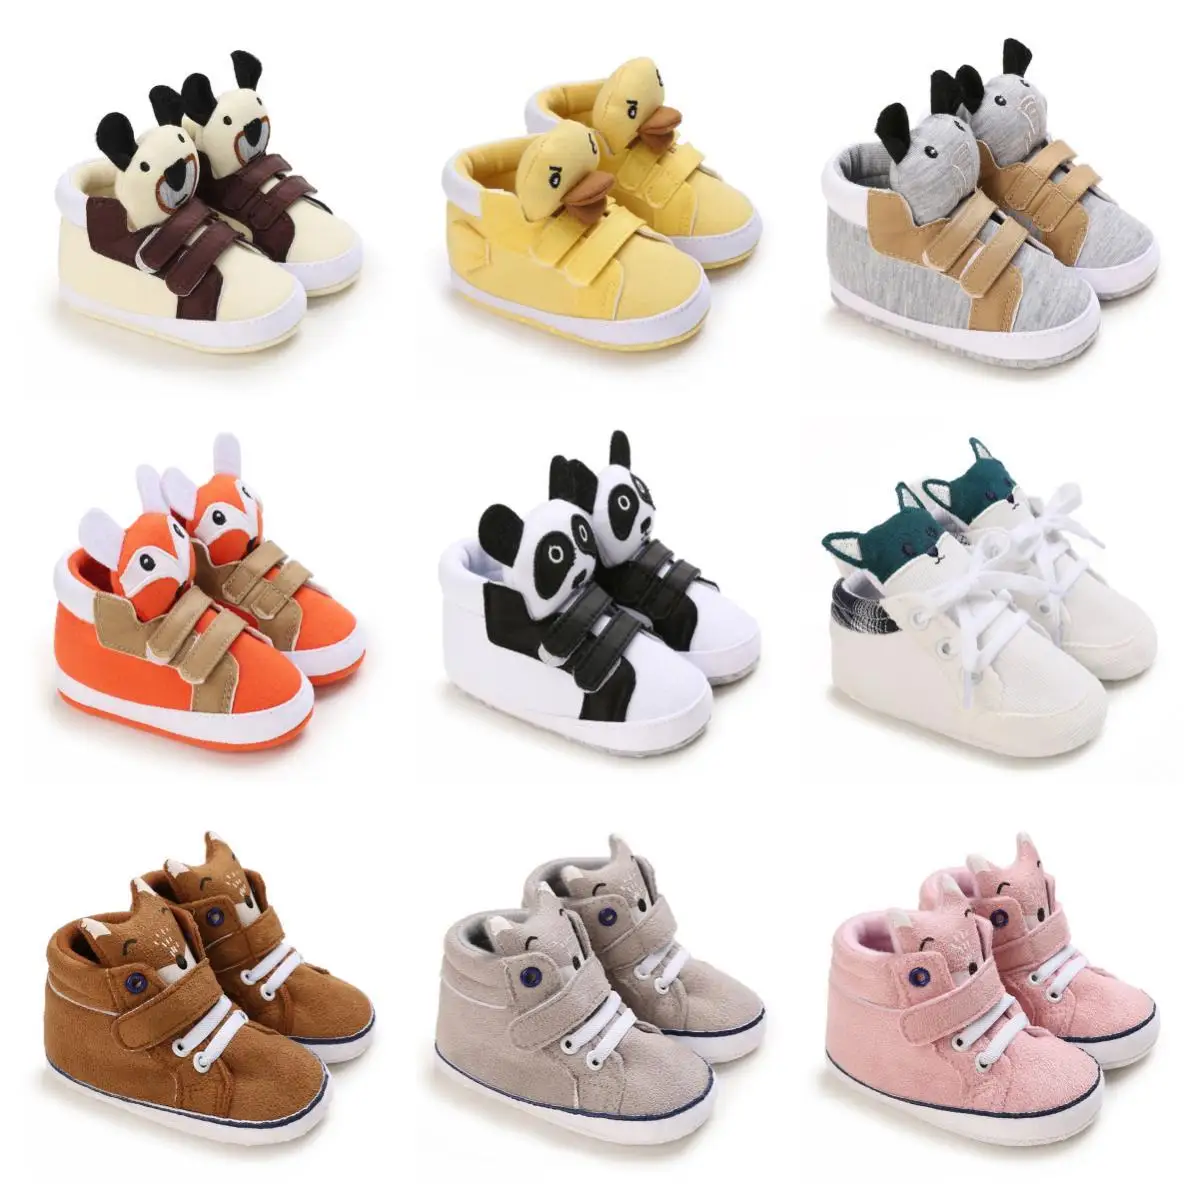 Classic Baby Shoe Boy Girl Baby Cute Animal Face Casual Flat Sneaker First Baby Ankle Boot Cotton Non-slip Warm Walking Shoes newborn baby socks shoes boy girl baby cute animal face toddler shoes first toddler ankle boots cotton non slip warm baby shoes